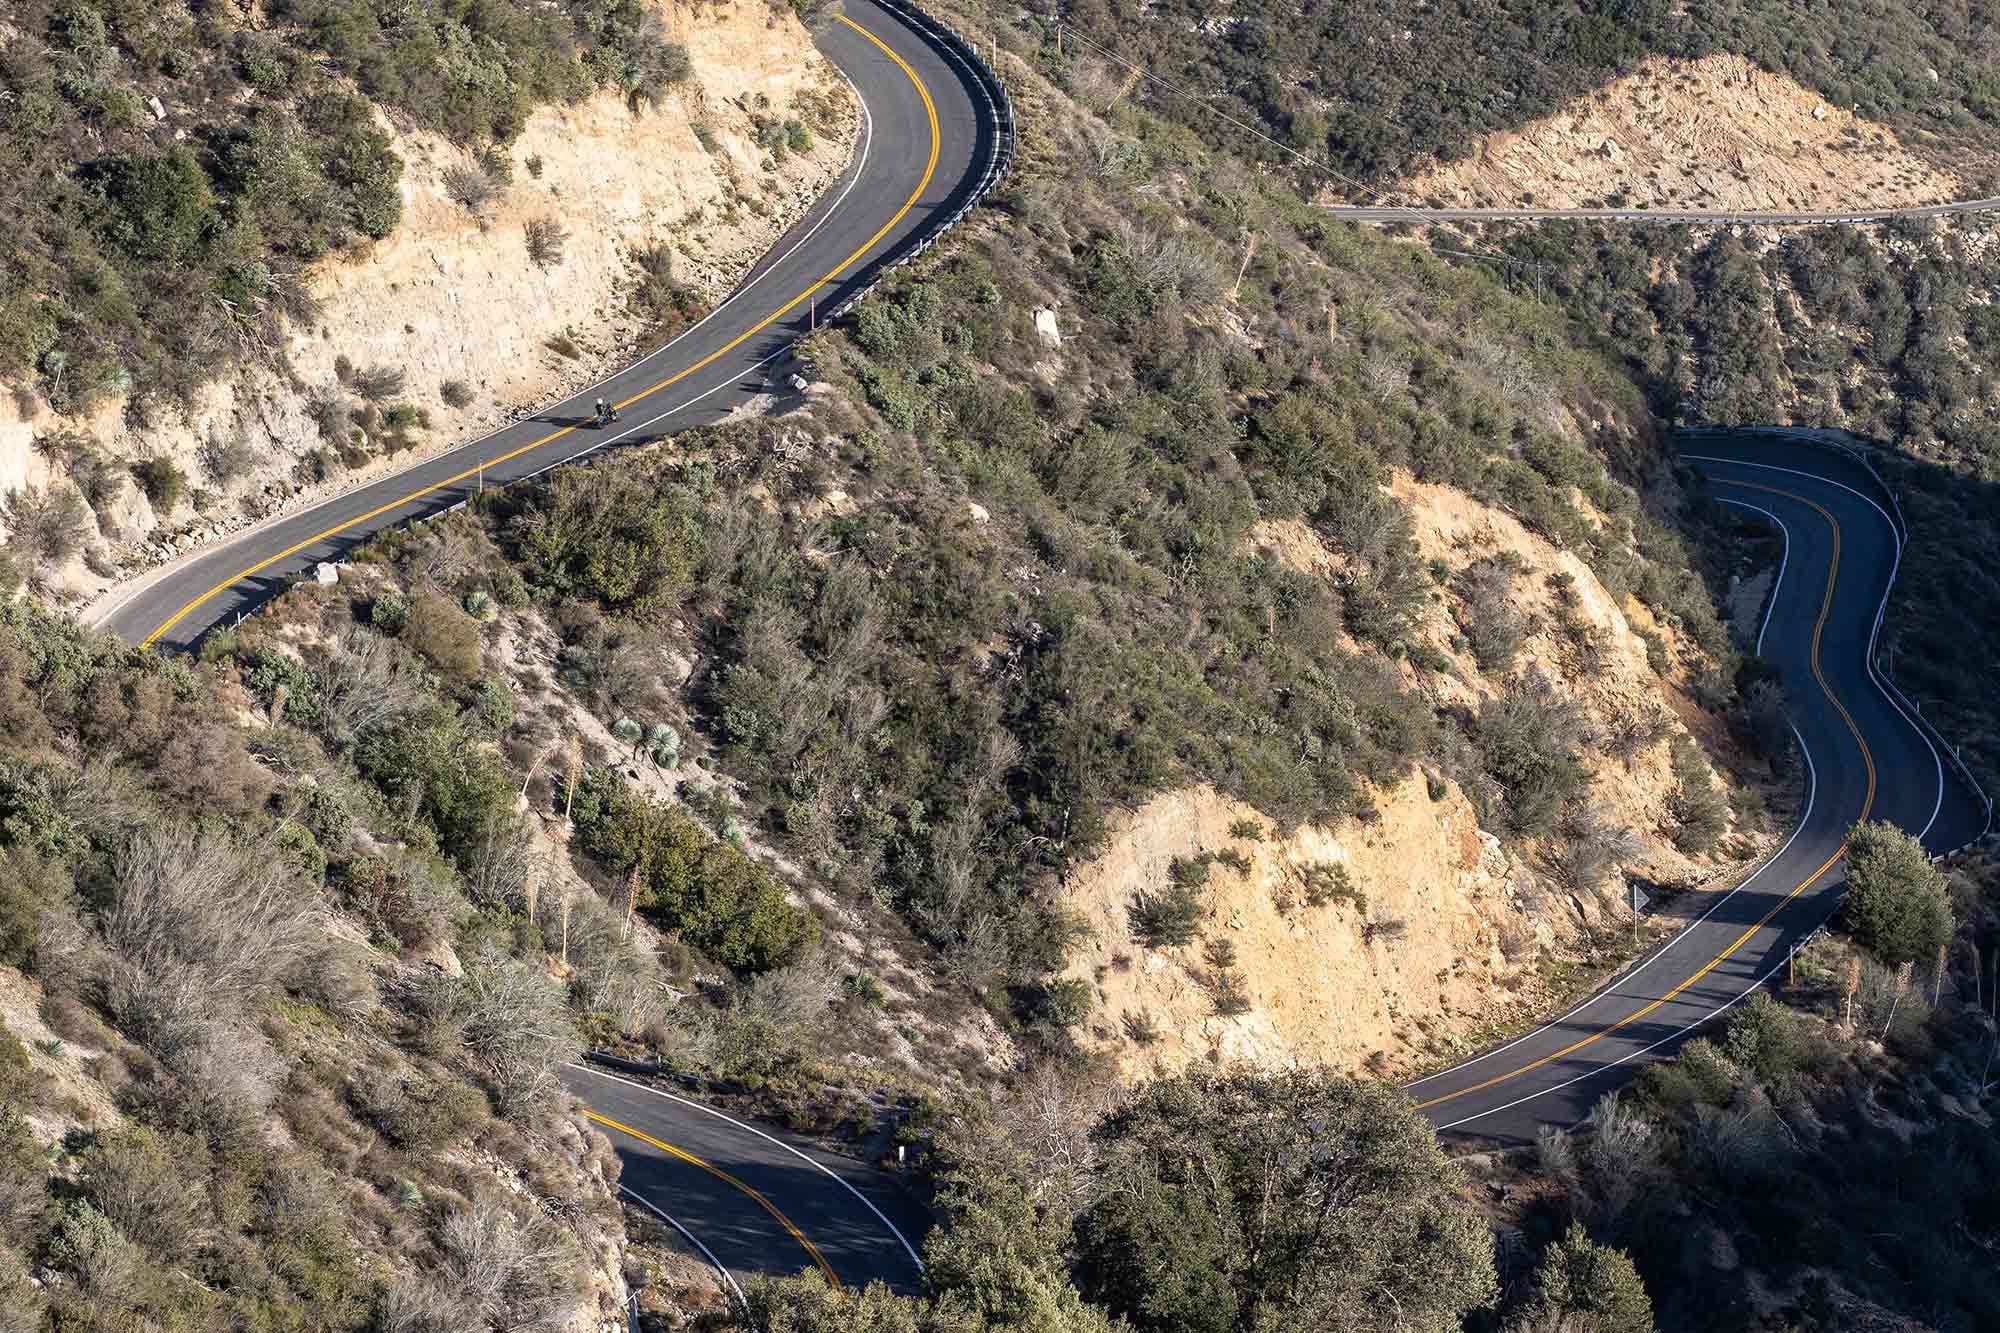 The winding hills of Angeles National Forest have proven to be an excellent testing ground.